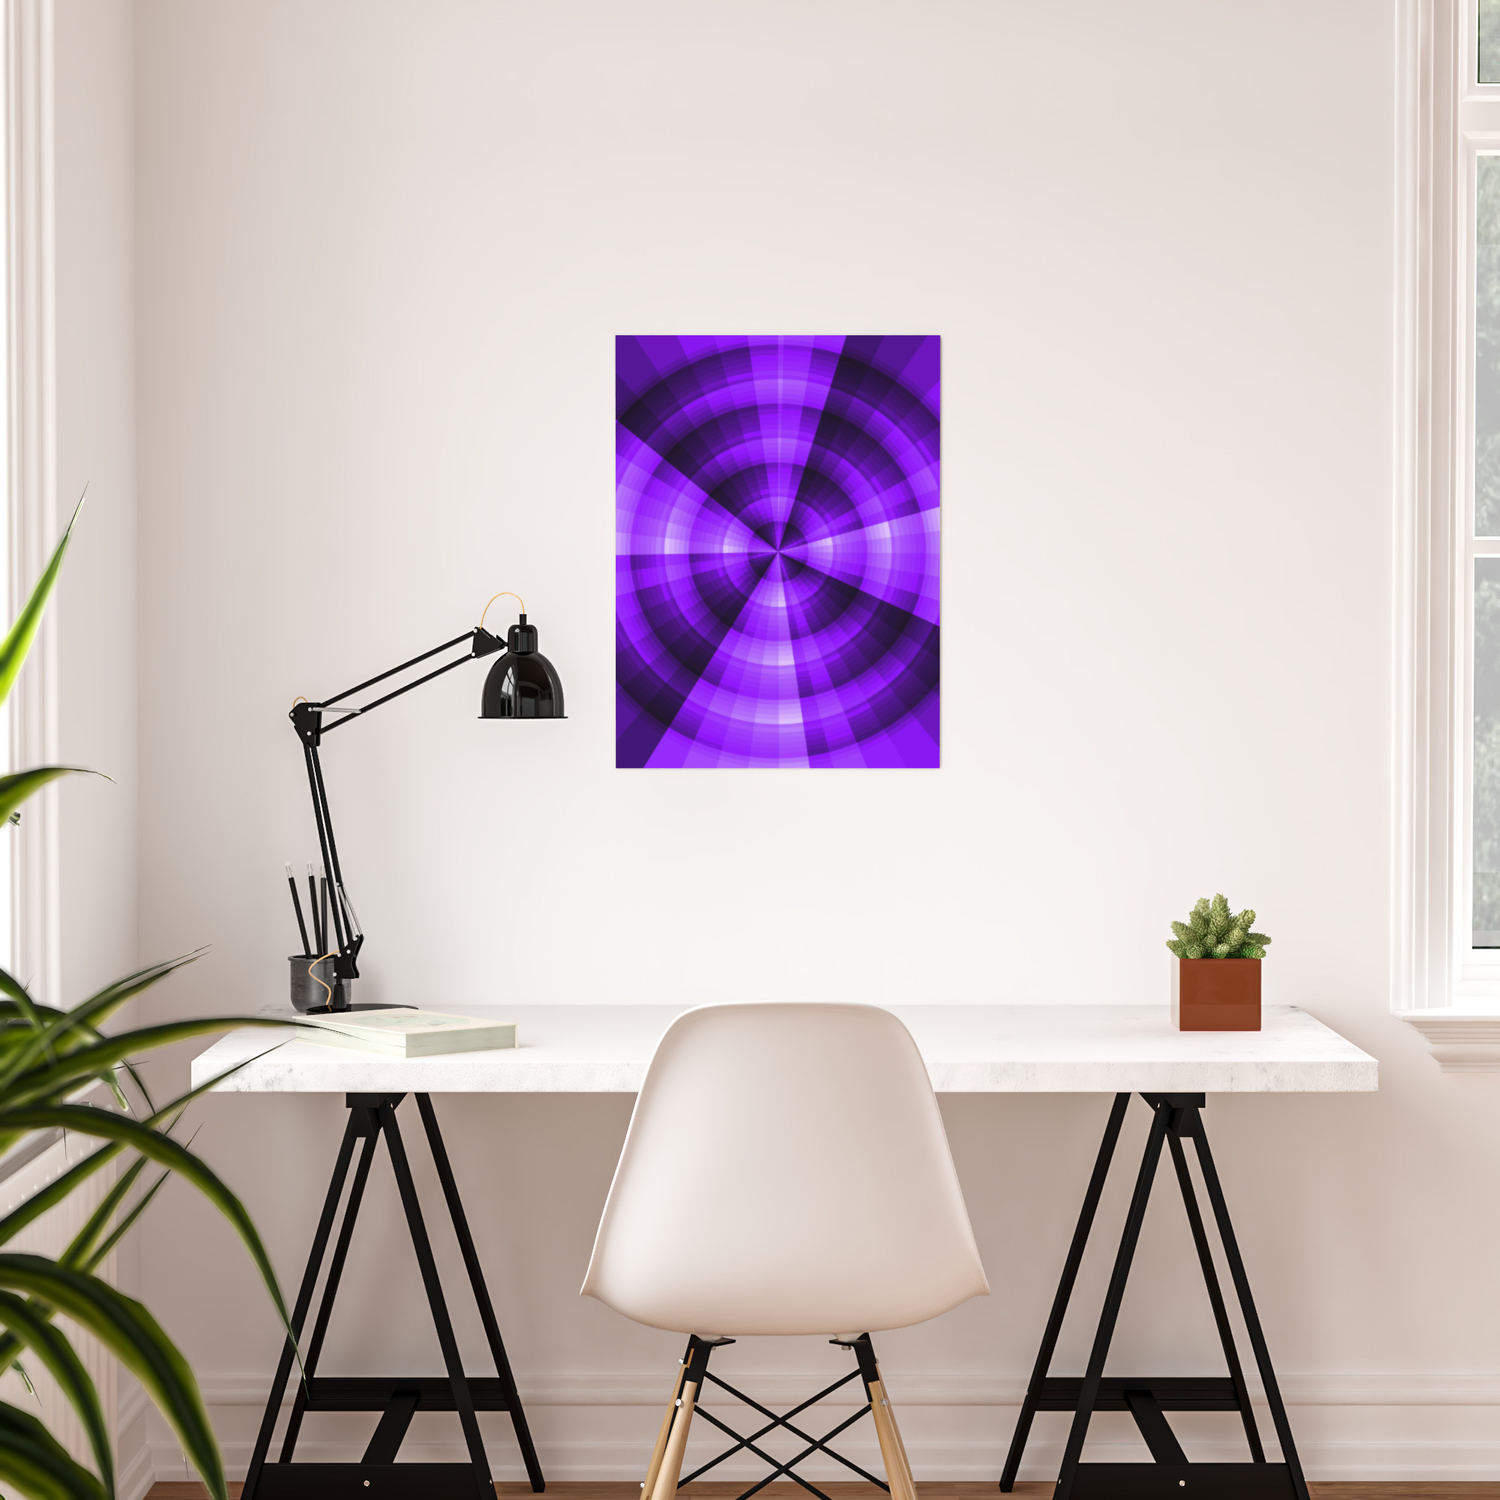 Purple Monochromatic Radial Design Poster By Beckybetancourt